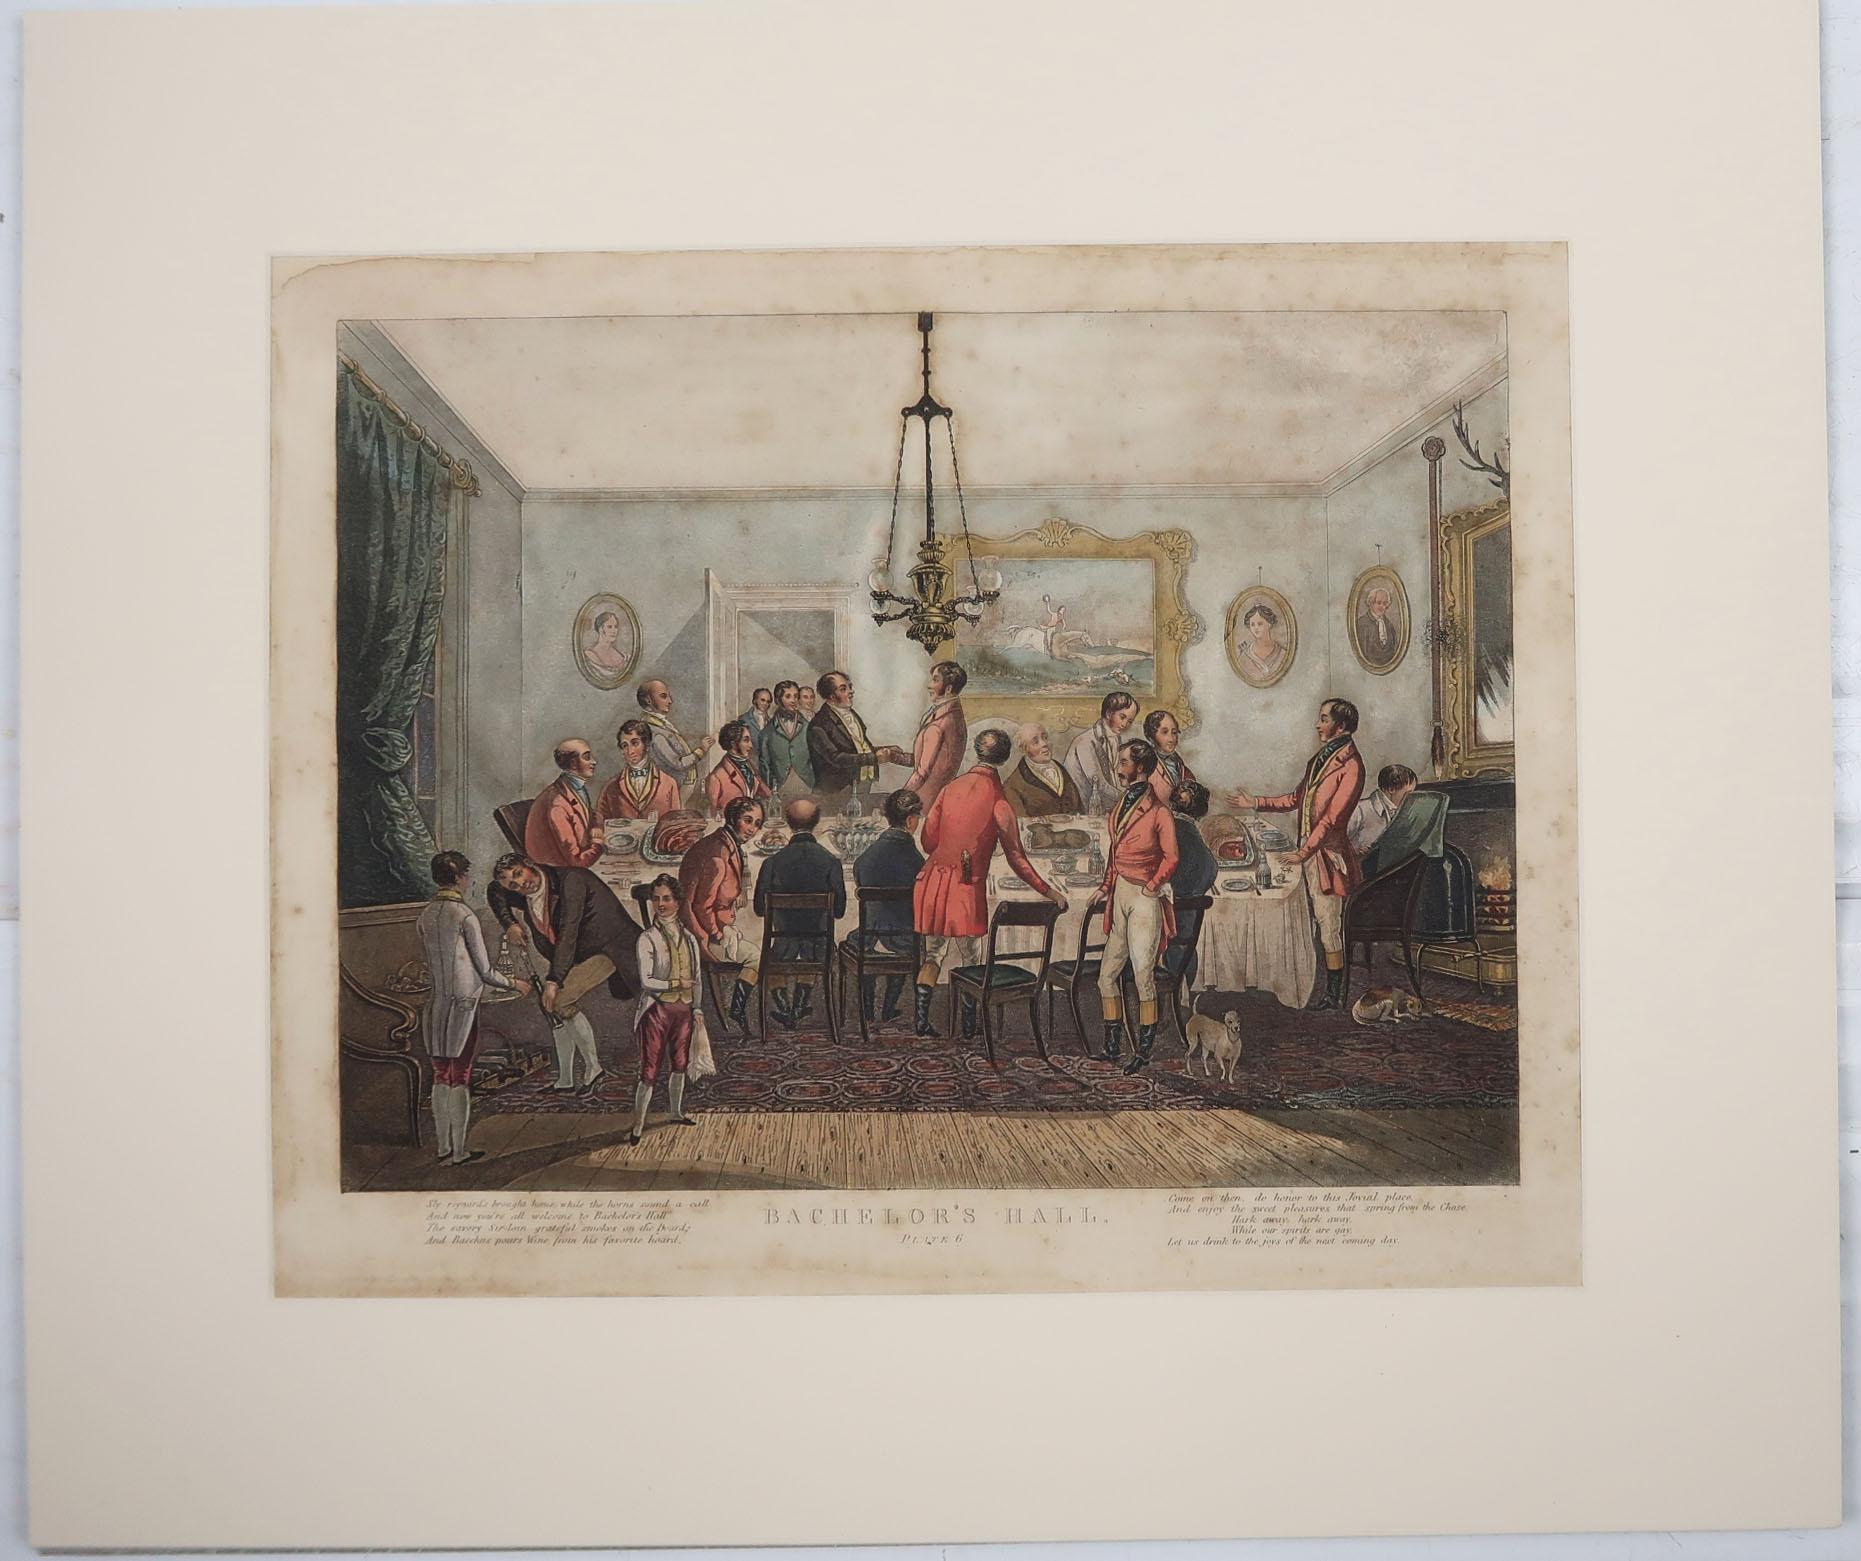 Set of 6 Original Antique Sporting Prints After Turner, Early 19th Century 4